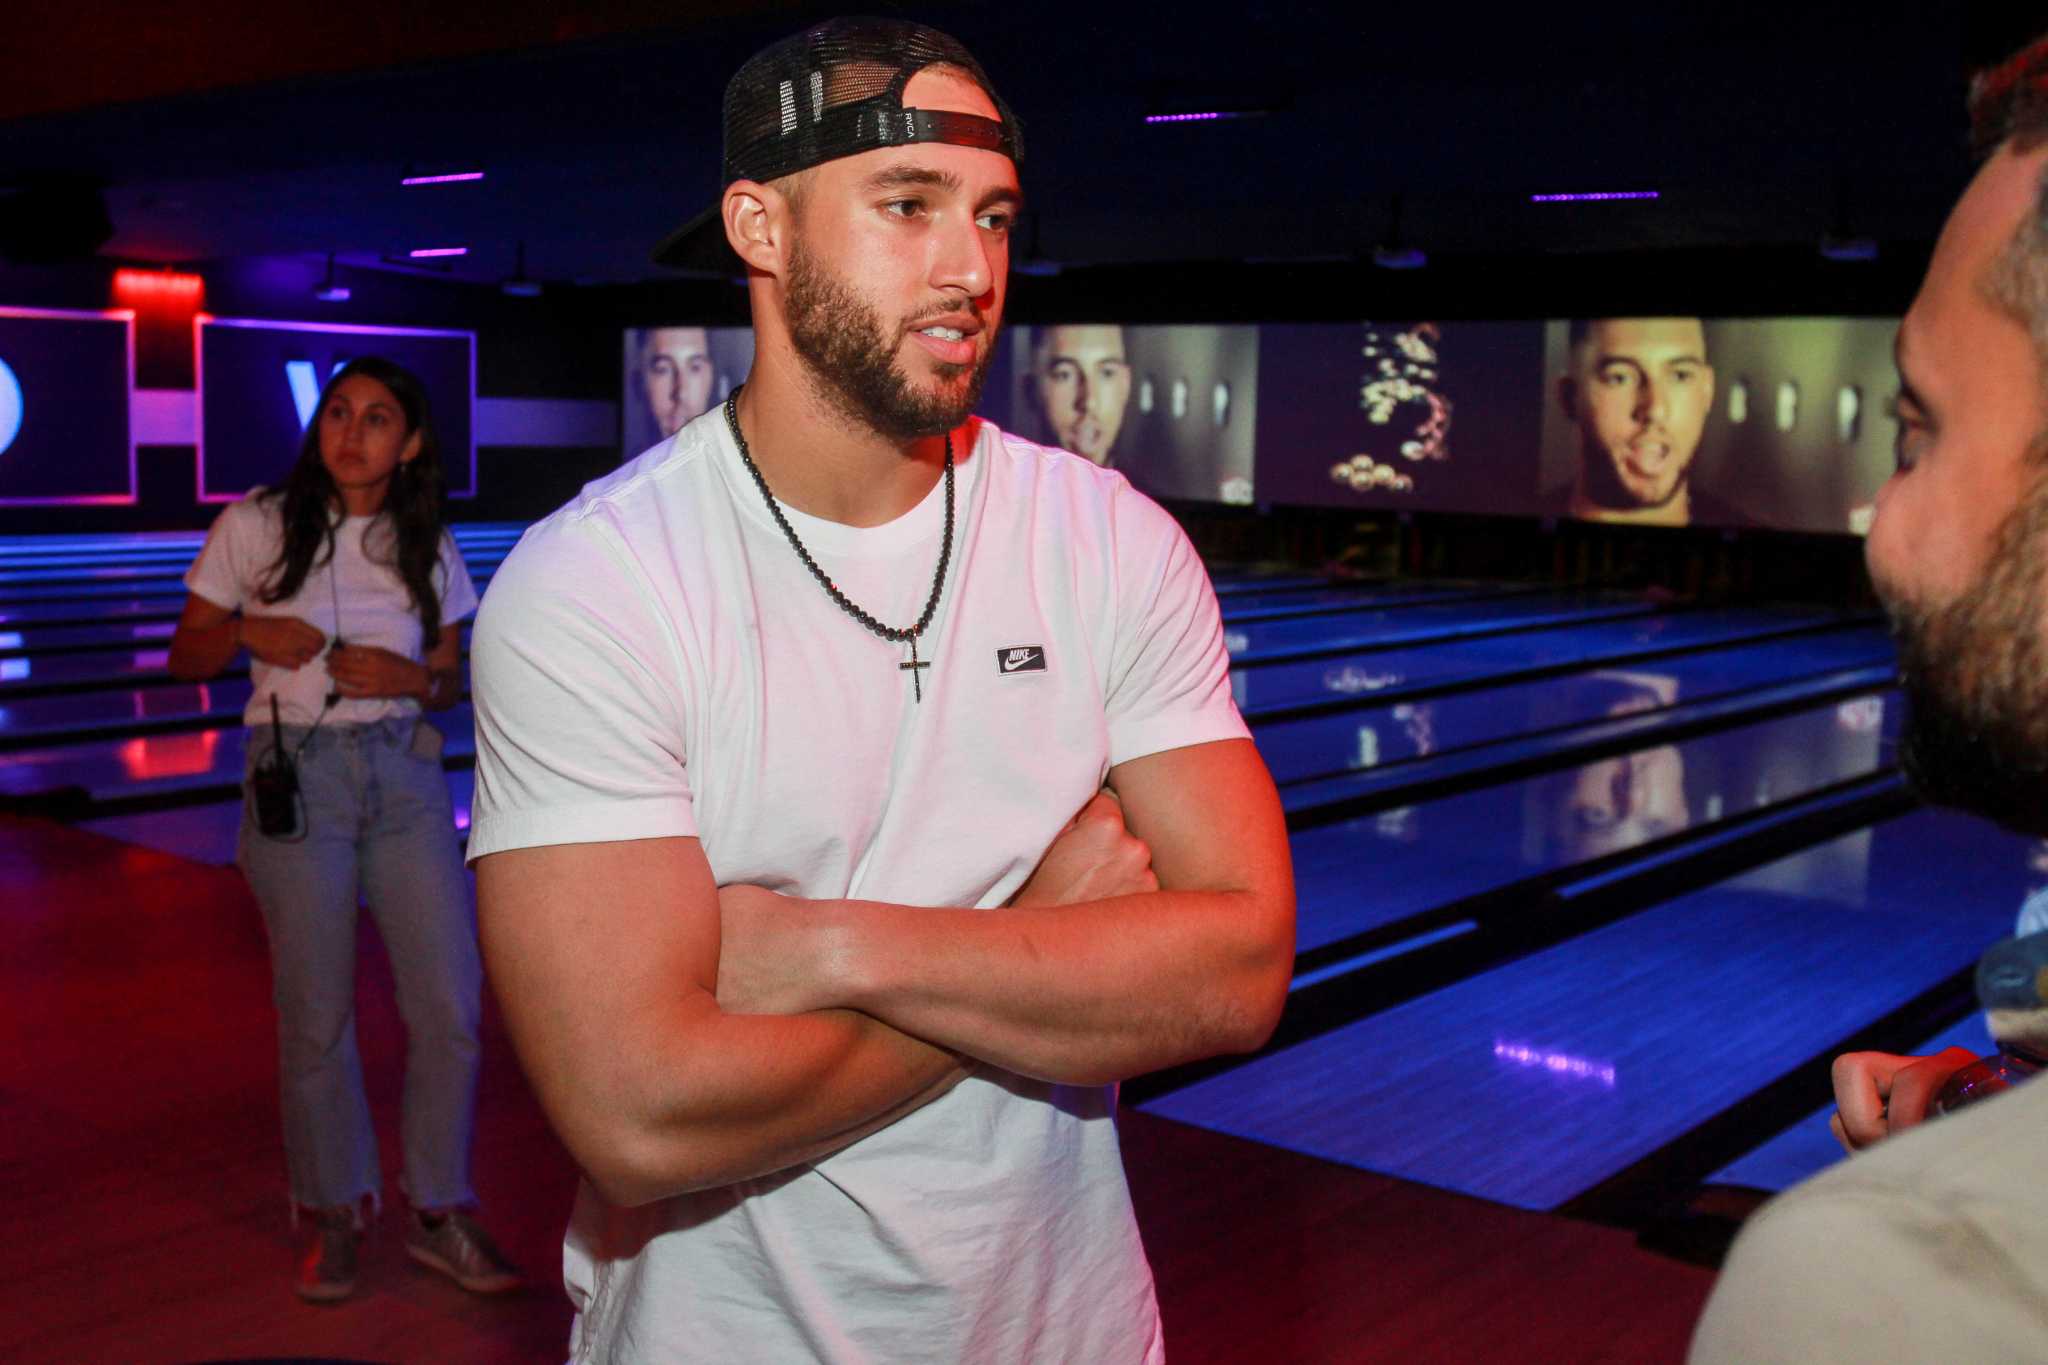 George Springer's Fifth Annual All-Star Bowling Benefit Was